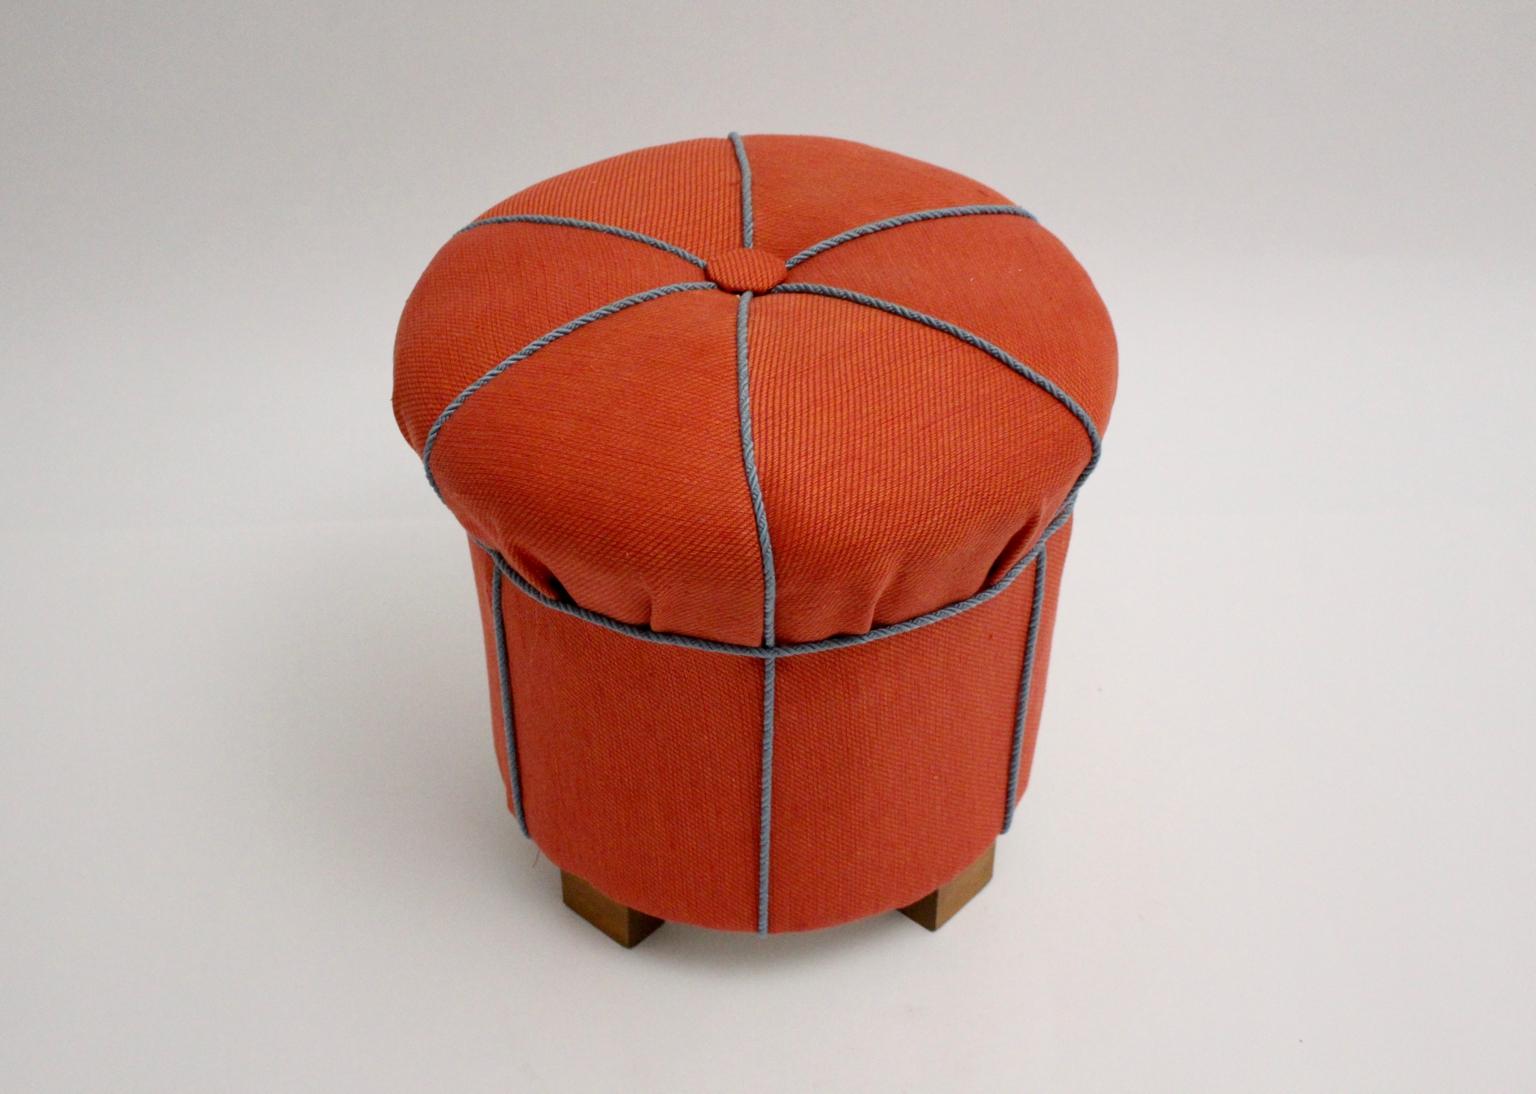 We present a delightful upholstered art deco pouf, Austria circa 1930, newly covered with red high-quality textile fabric by Svenskt Tenn and decorated with light blue cords and a button.
Also the pouf shows beechwood feet.
So the vintage